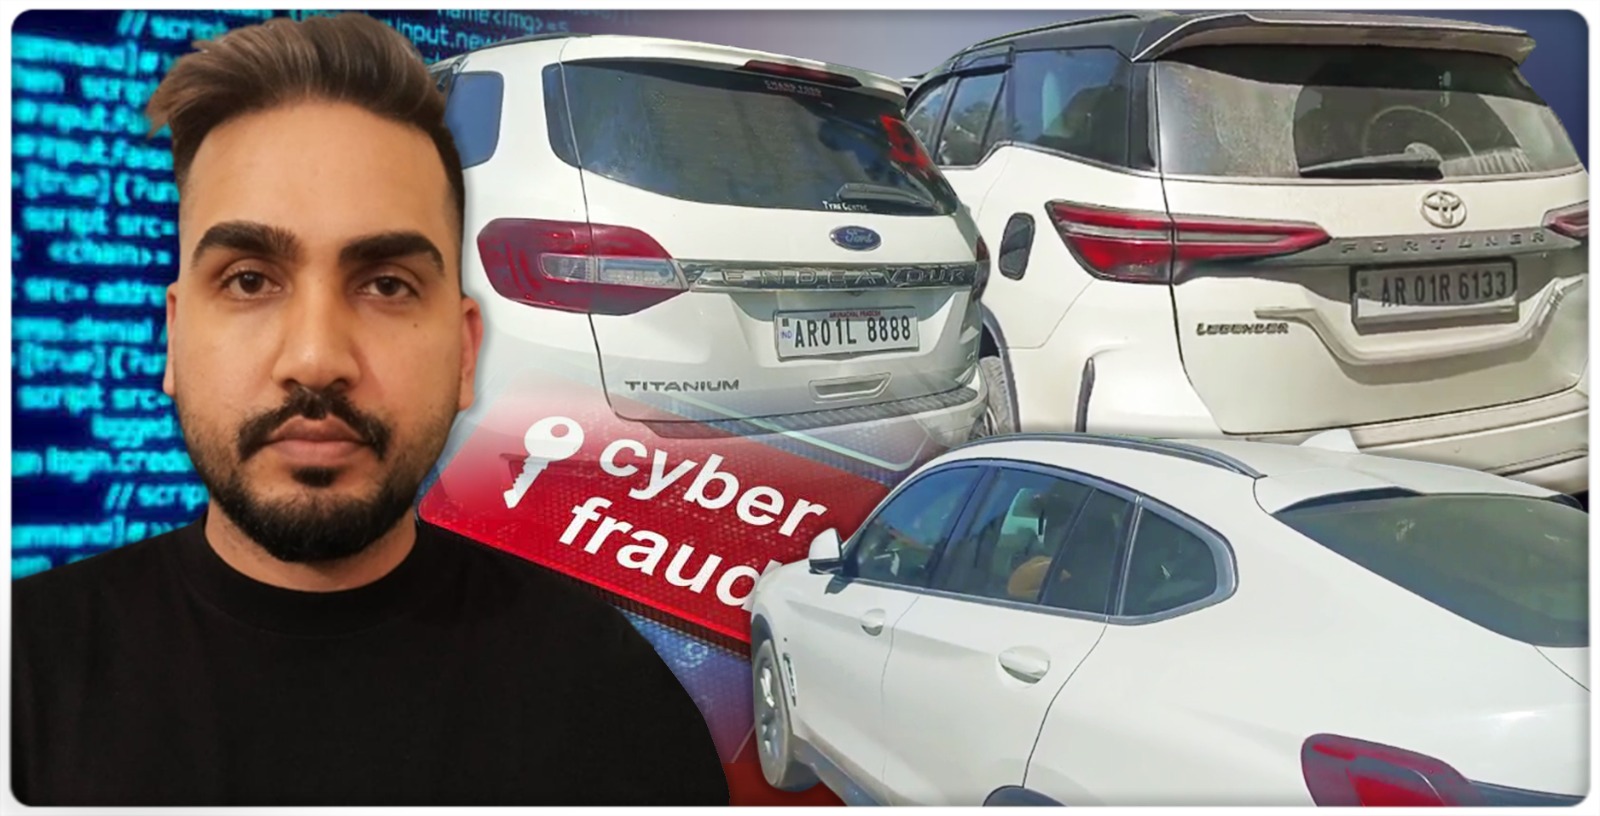 multi-crore-scam-luxury-vehicles-seized-from-mastermind-david-residence